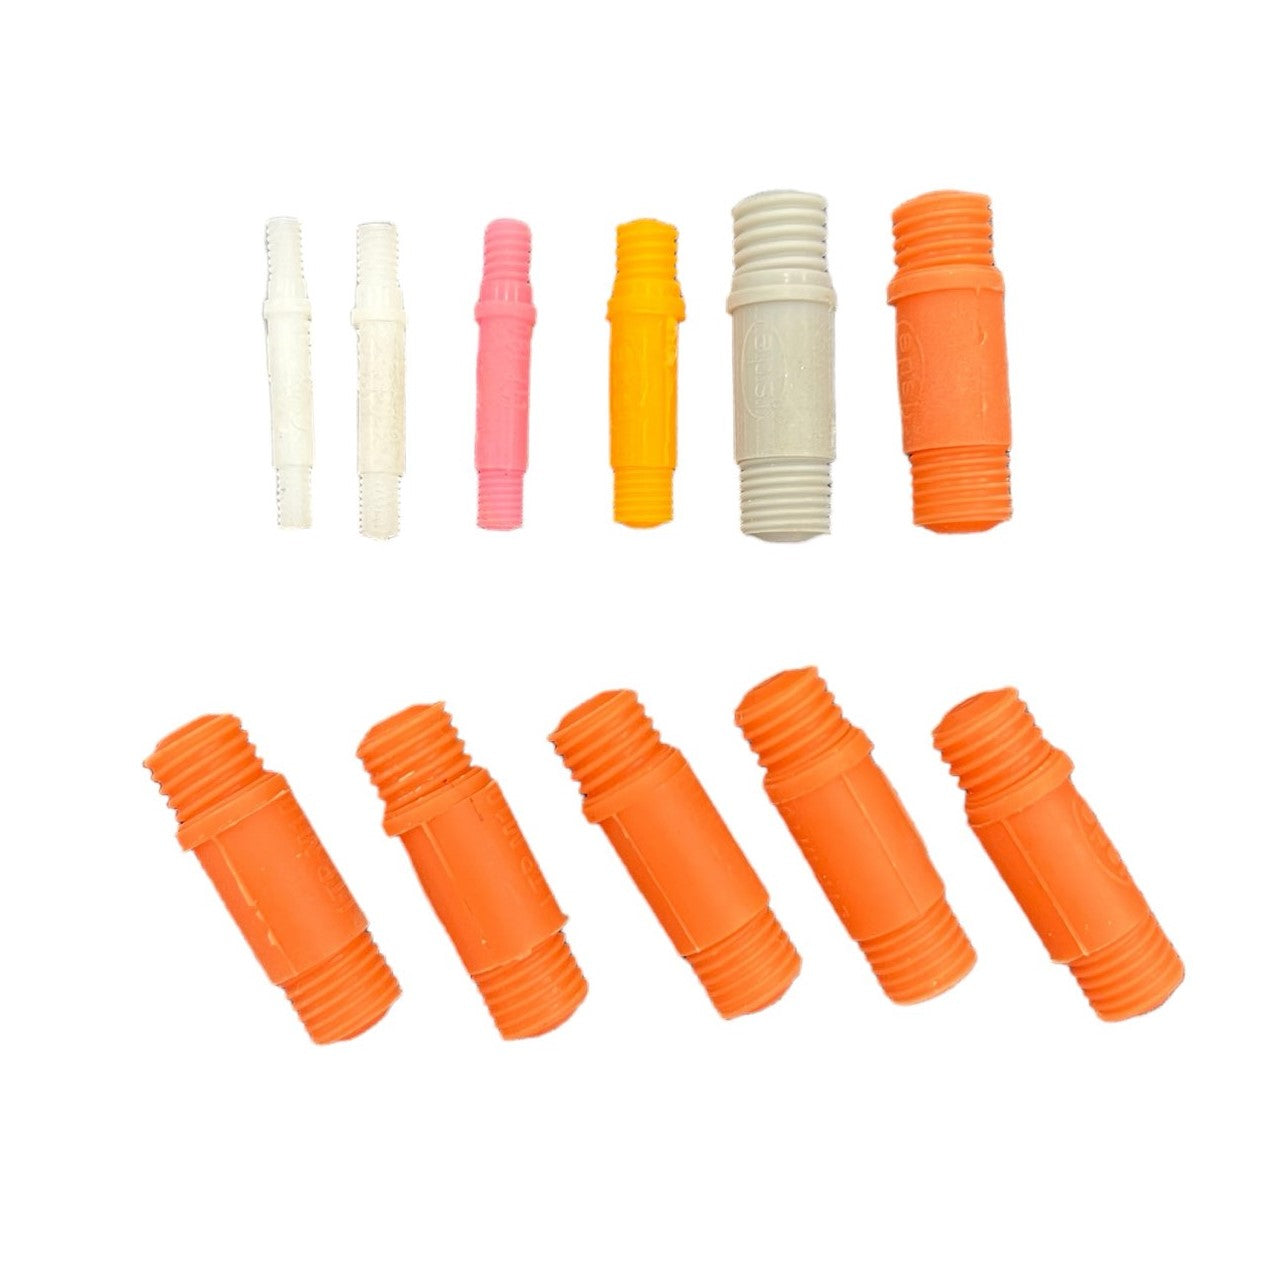 Dual-sided Silicone Threaded Plugs #m10x1.5 Coarse / #m10x1.25 Fine (50 Count)